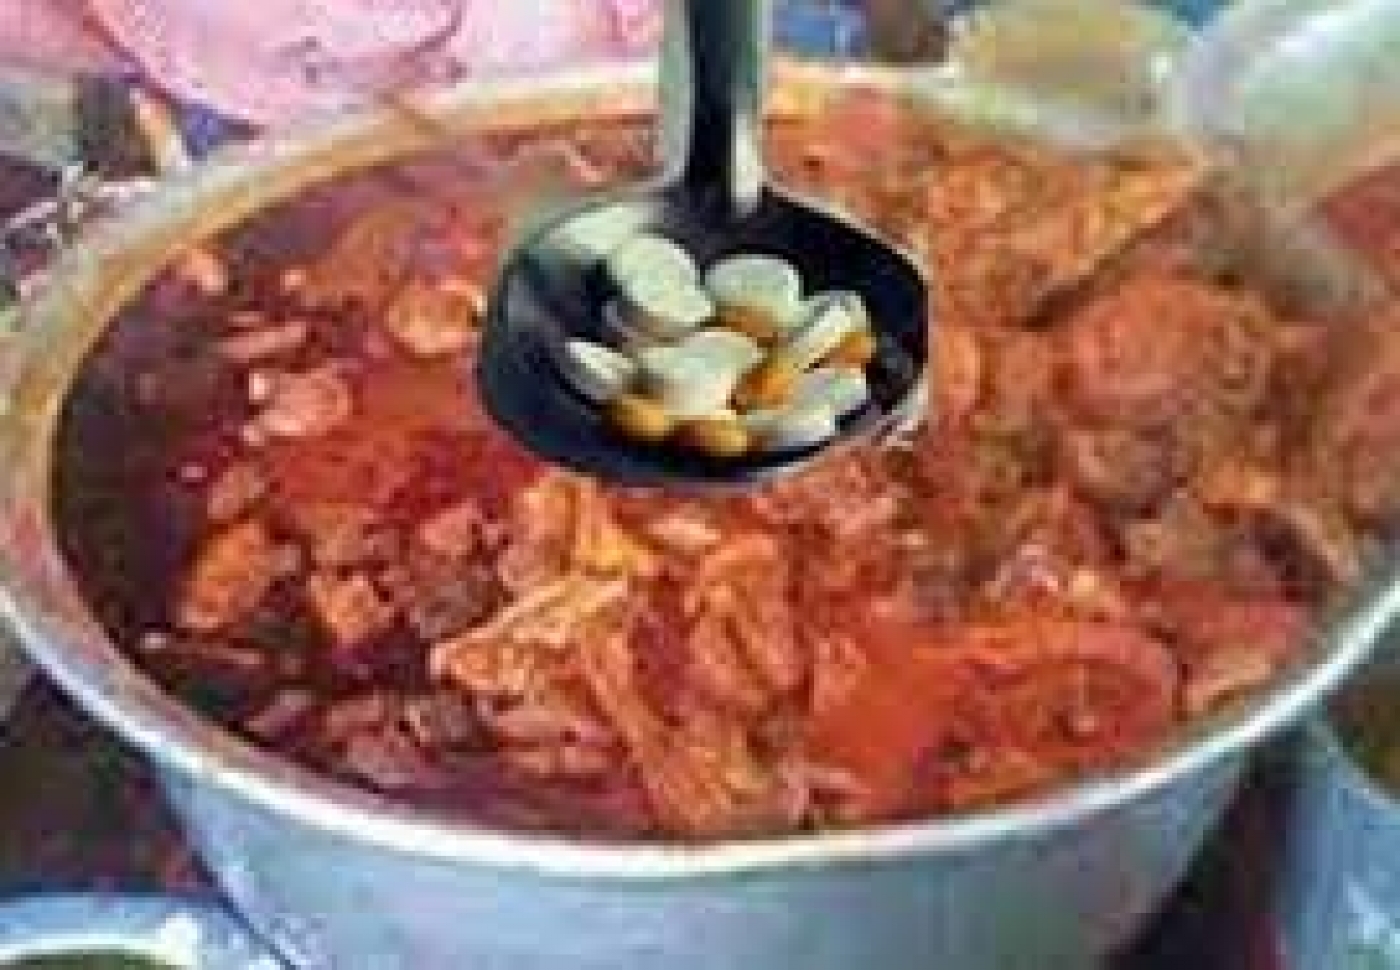 Foods cooked with paracetamol can damage liver, physician warns Nigerians